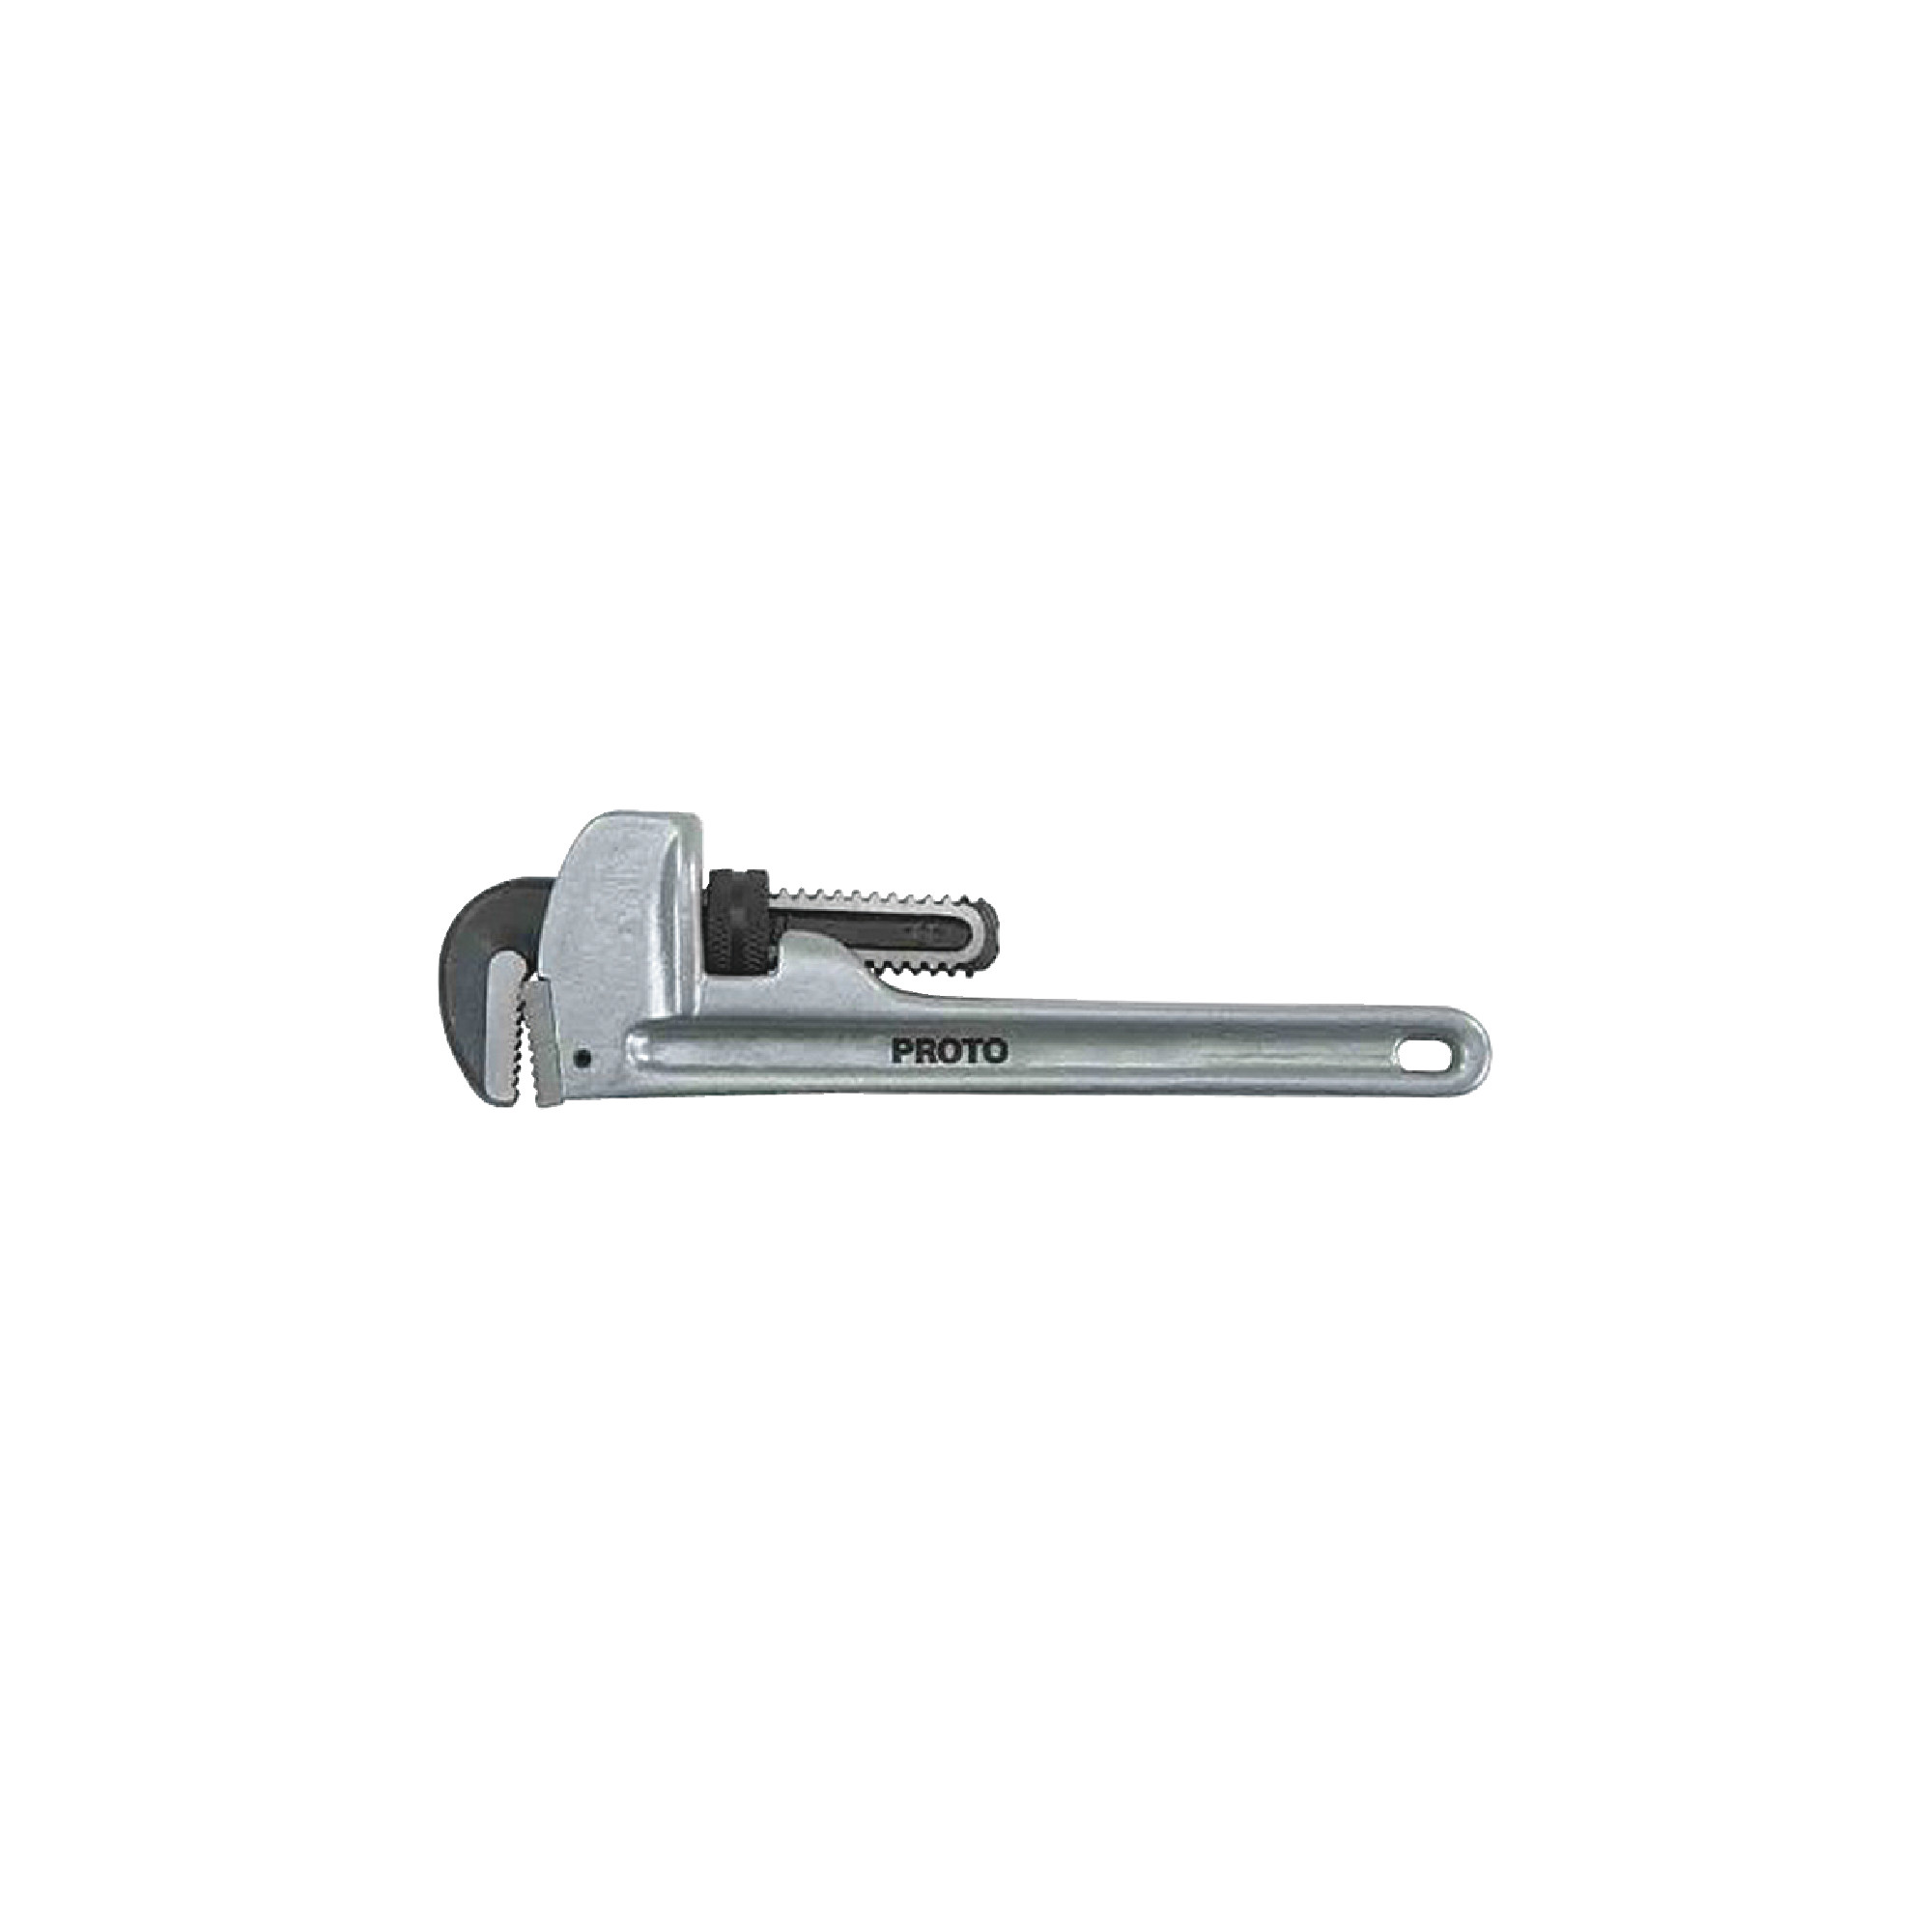 10" Aluminum Pipe Wrench - Model: J810A